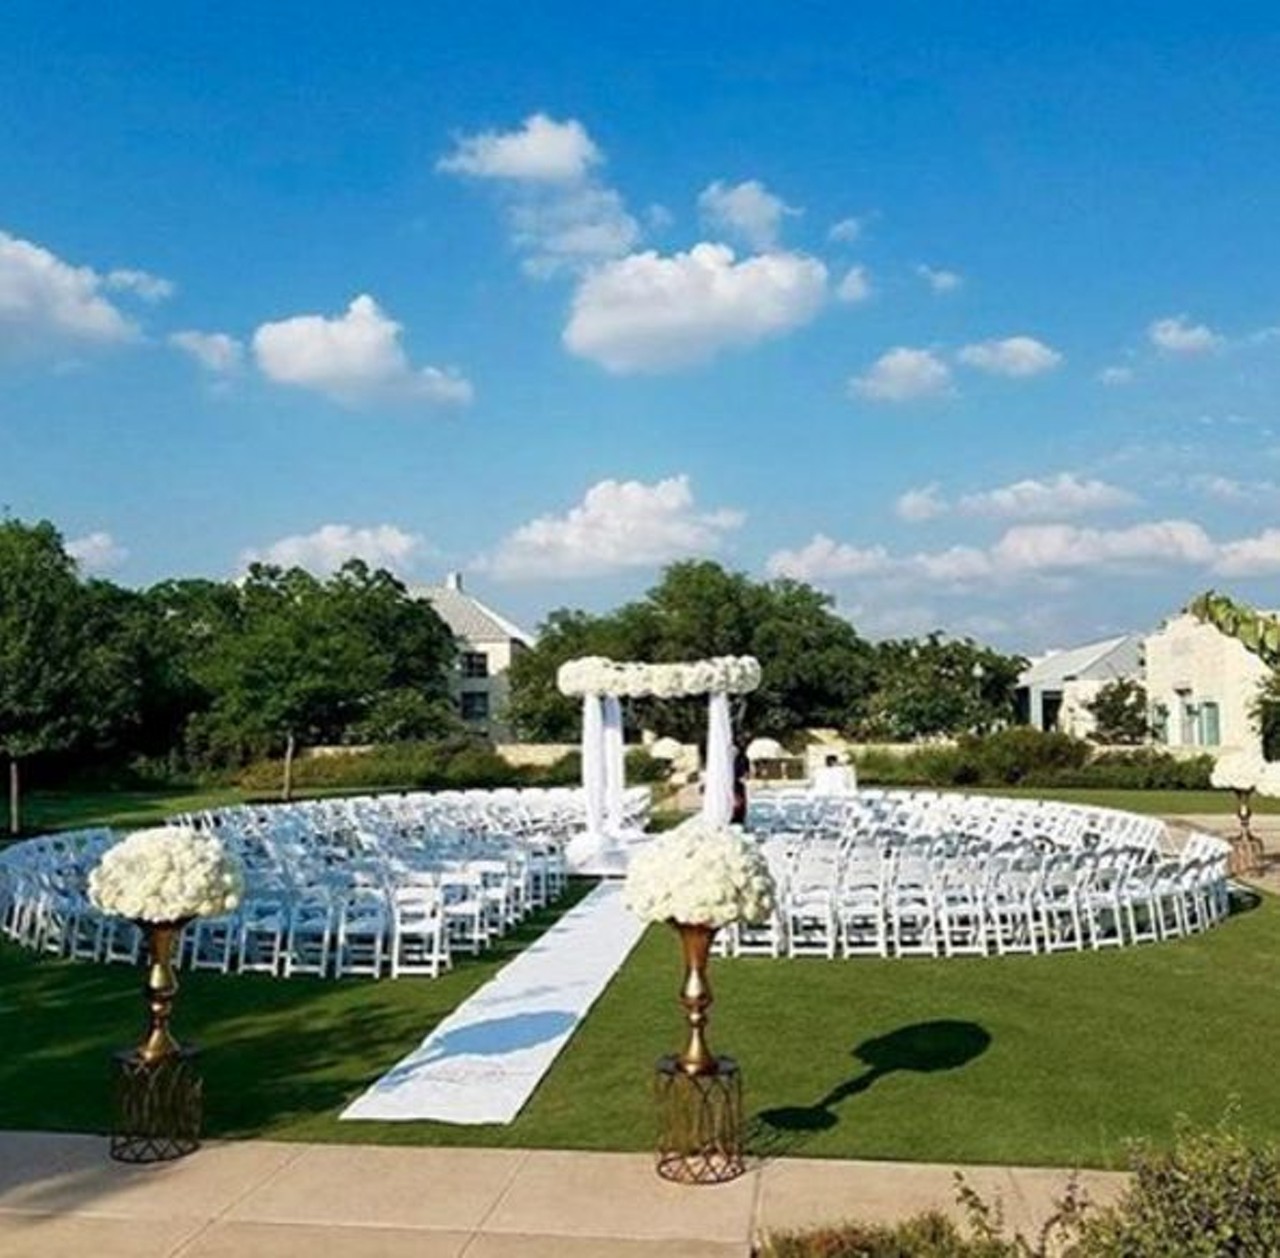 Hyatt Regency Hill Country
Experience the Hill Country without leaving city limits. You&#146;ll have plenty of options for your nuptials: the Courtyard Deck, the plaza, in the garden or on the lawn, in one of the three ballrooms, or two different pavilions.
9800 Hyatt Resort Dr, hillcountry.regency.hyatt.com
Photo by weddingsbydb via Instagram, hyatthillcountry